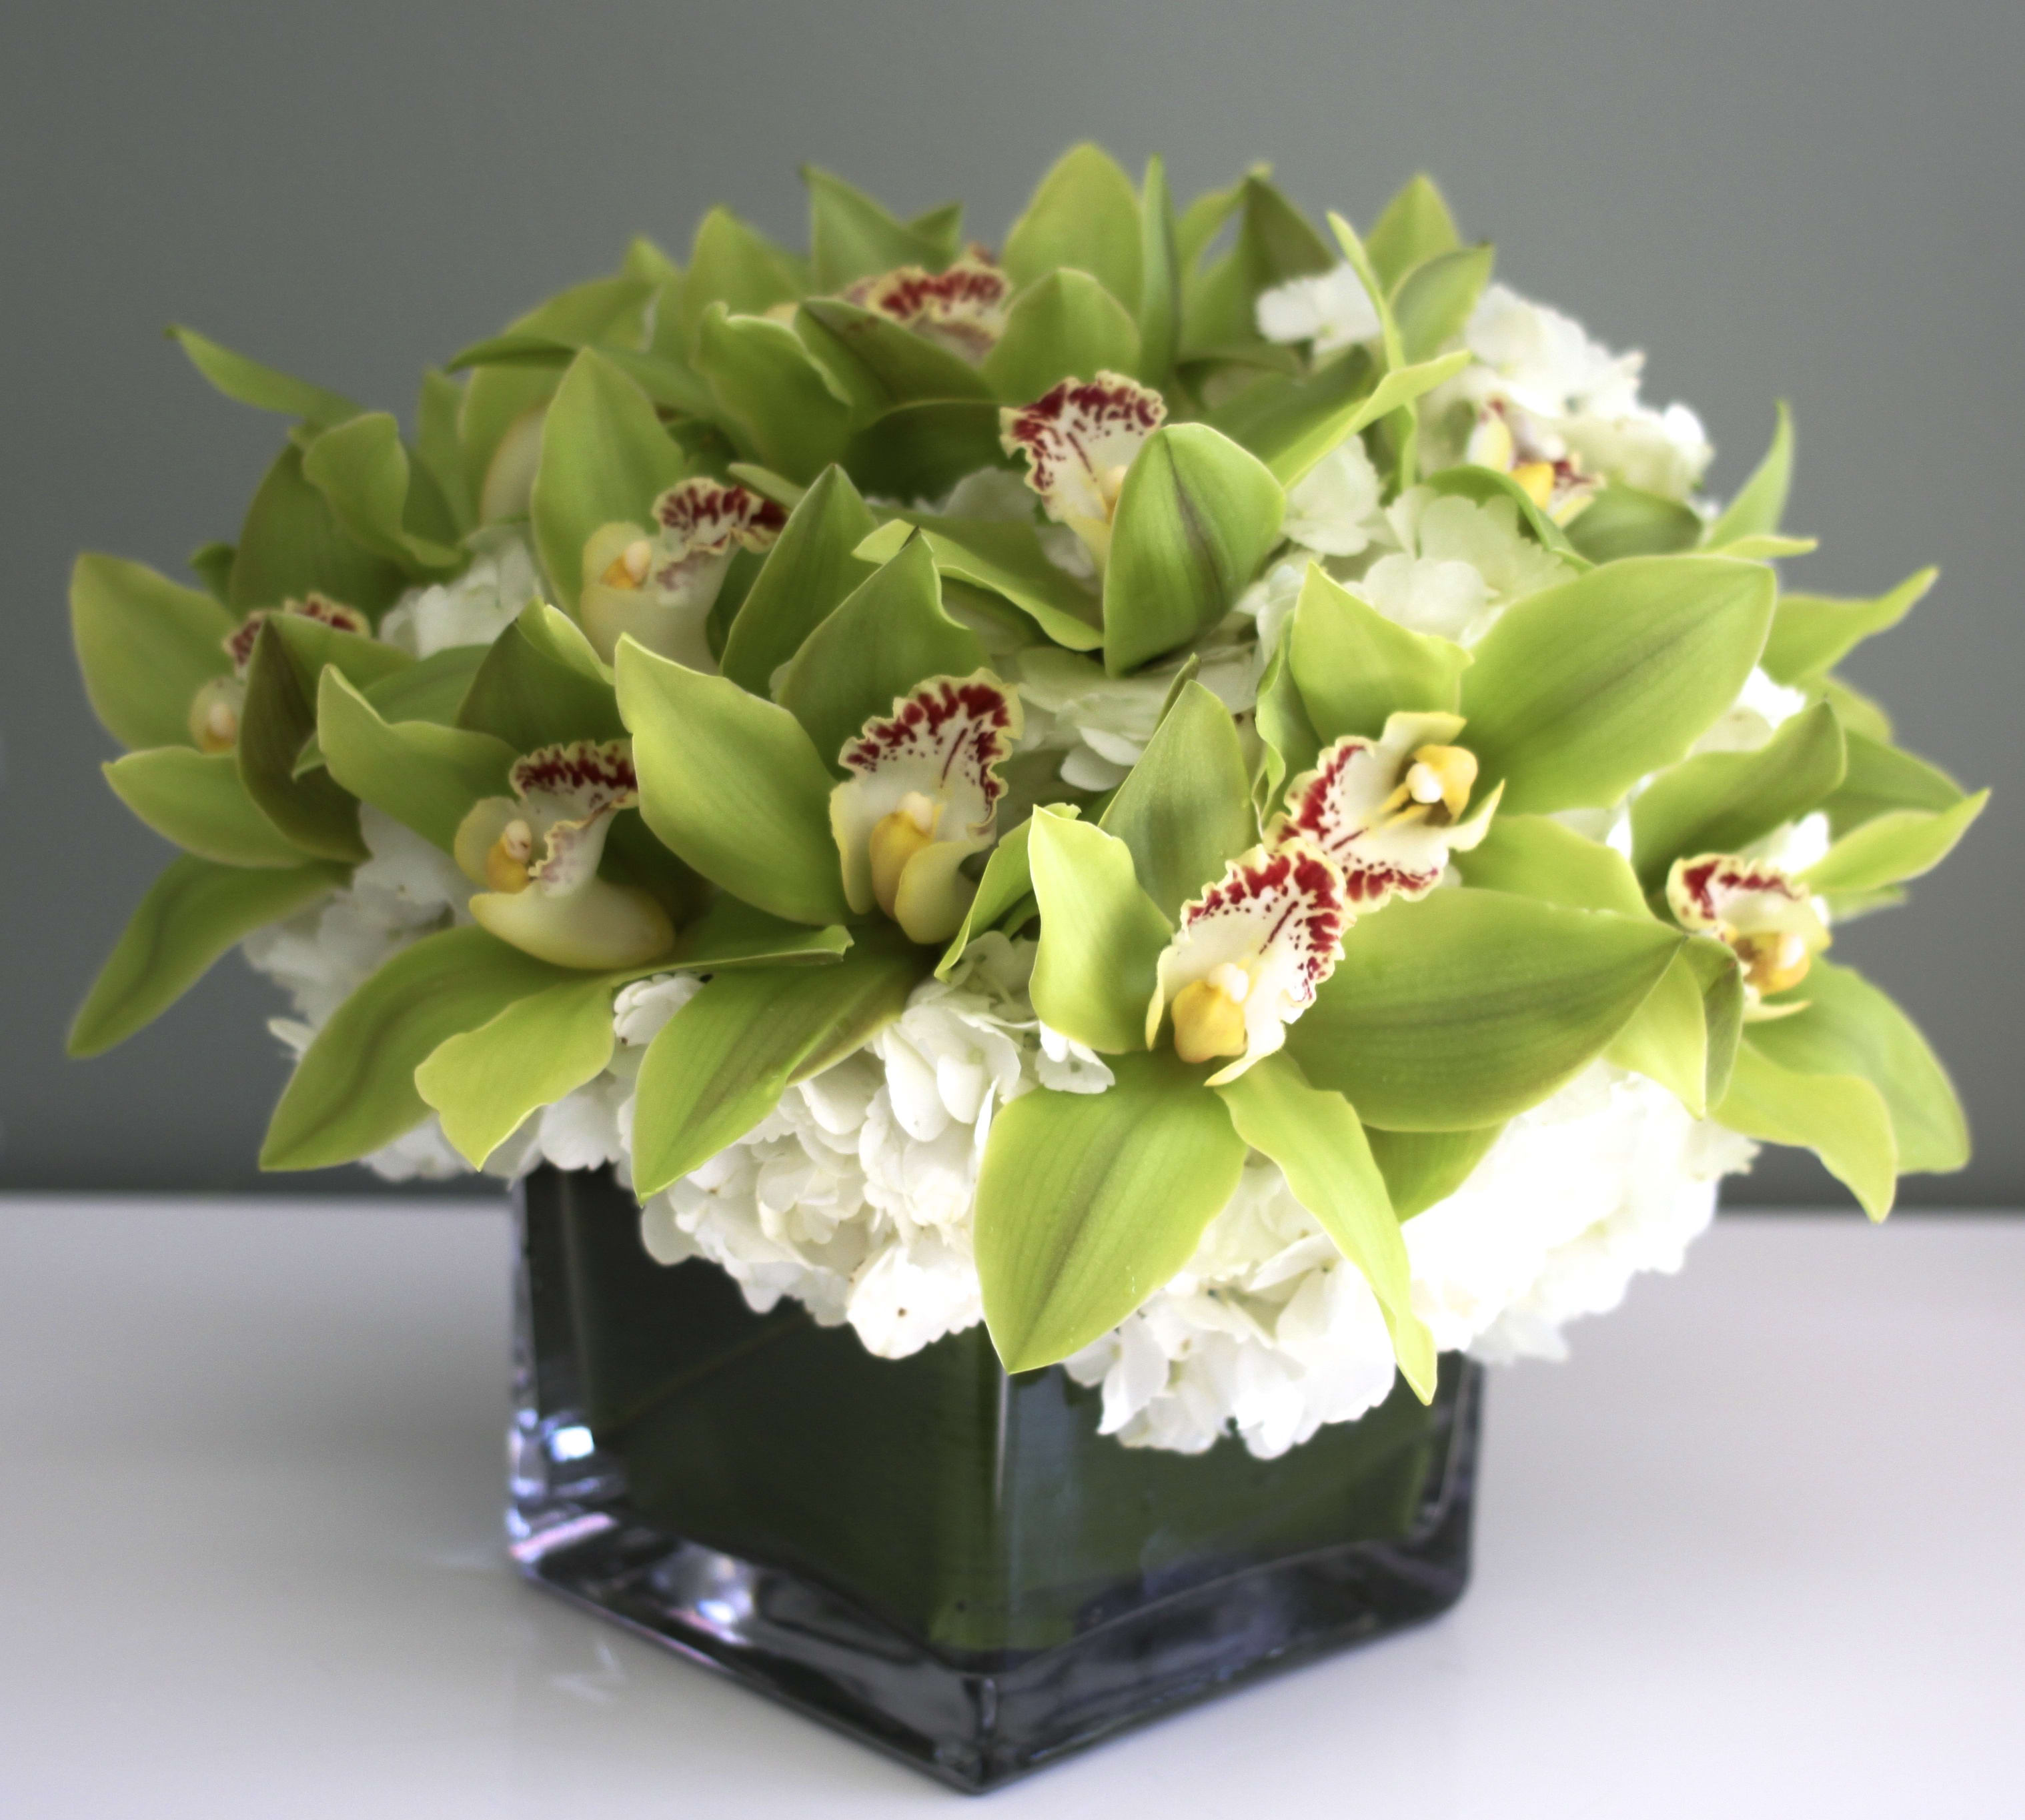 Green Orchids in a vase - White hydrangeas beautifully accented with green cymbidium orchids in a glass cube, 